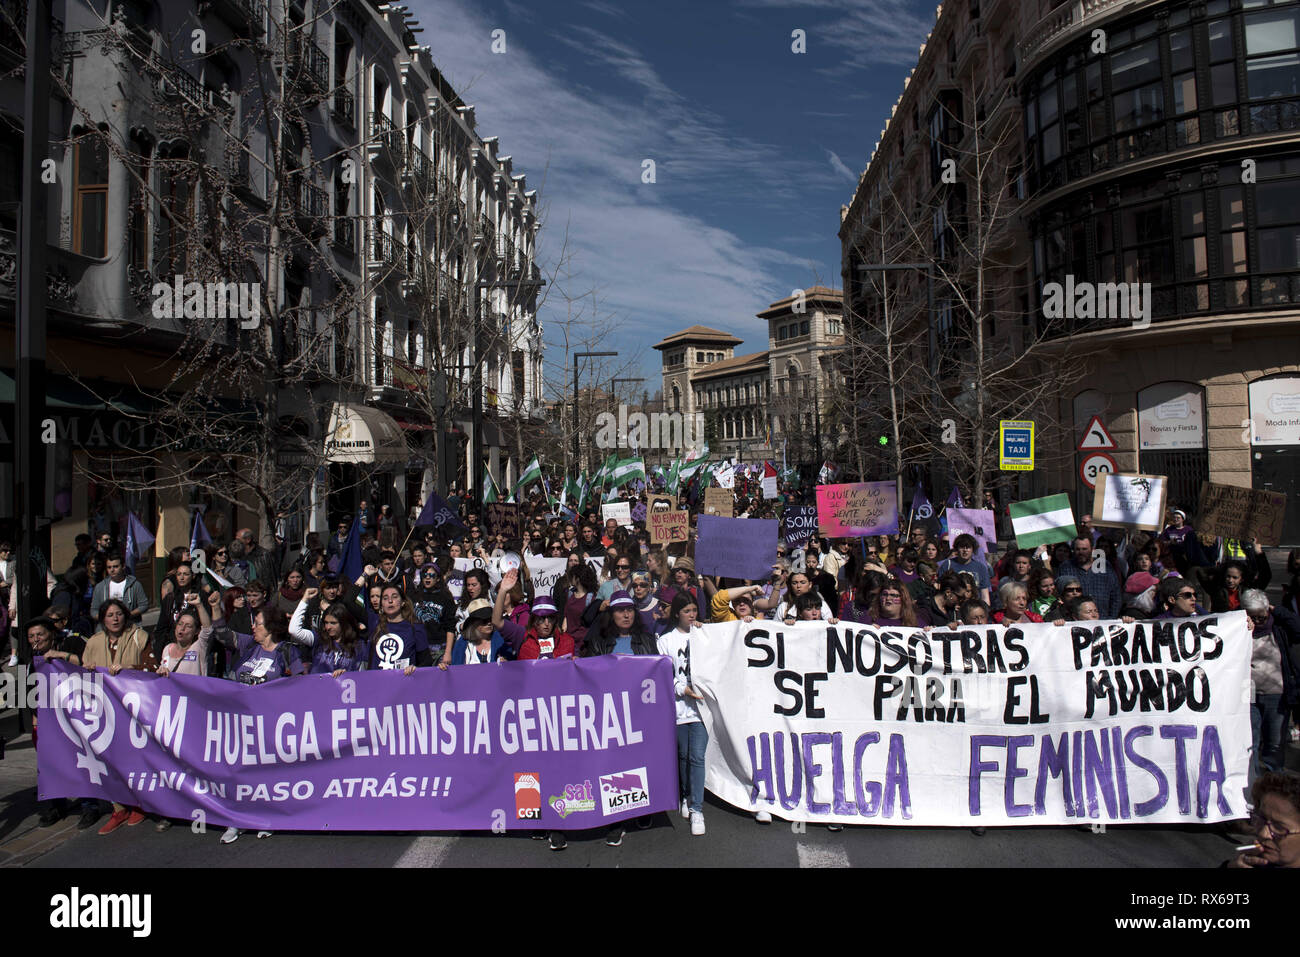 March 8, 2019 - Granada, Granada, Spain - Students seen demonstrating with banners along Gran Via street during the strike..Spanish people celebrate International Women's Day with a women's general strike against gender violence. (Credit Image: © Carlos Gil/SOPA Images via ZUMA Wire) Stock Photo